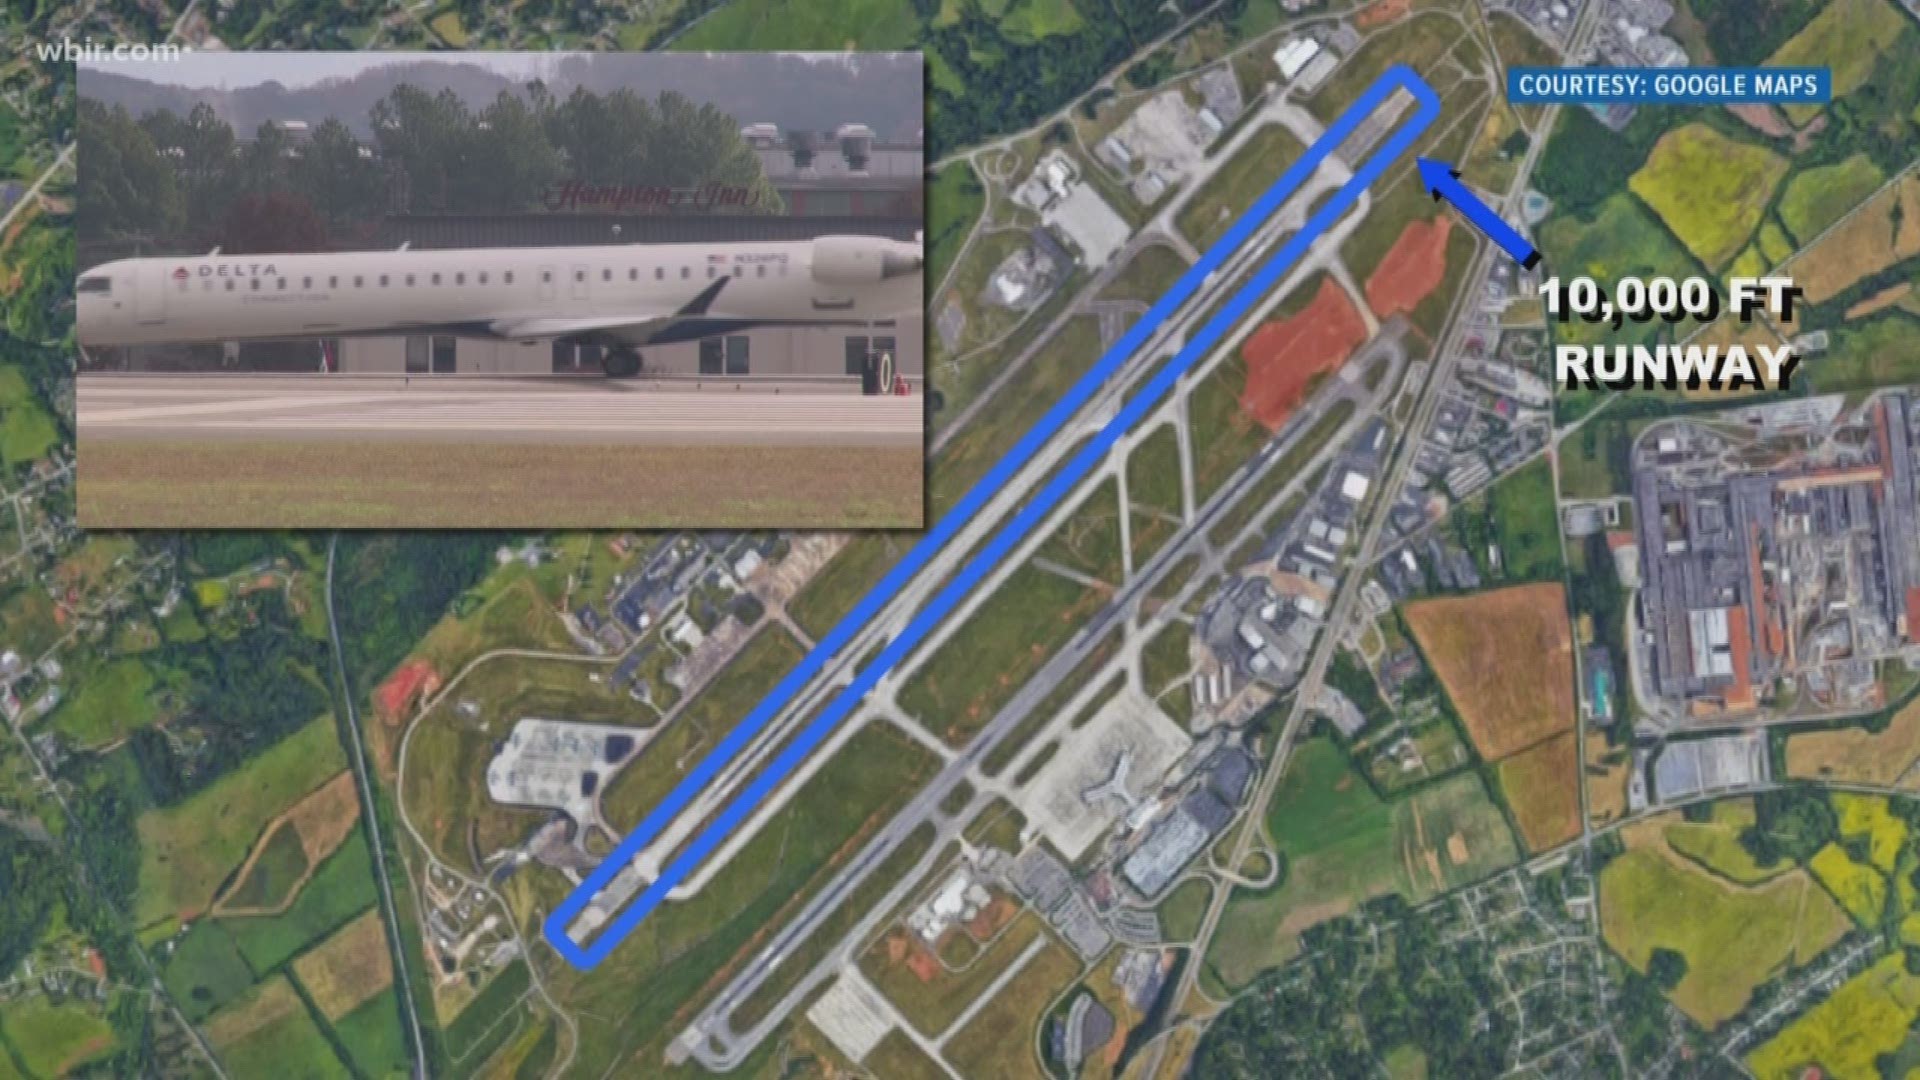 McGhee Tyson Airport announced today more upgrades coming to the Knoxville airport. It says the 10-thousand foot runway expansion is now complete, marking a milestone in its $110 million airfield modernization project.